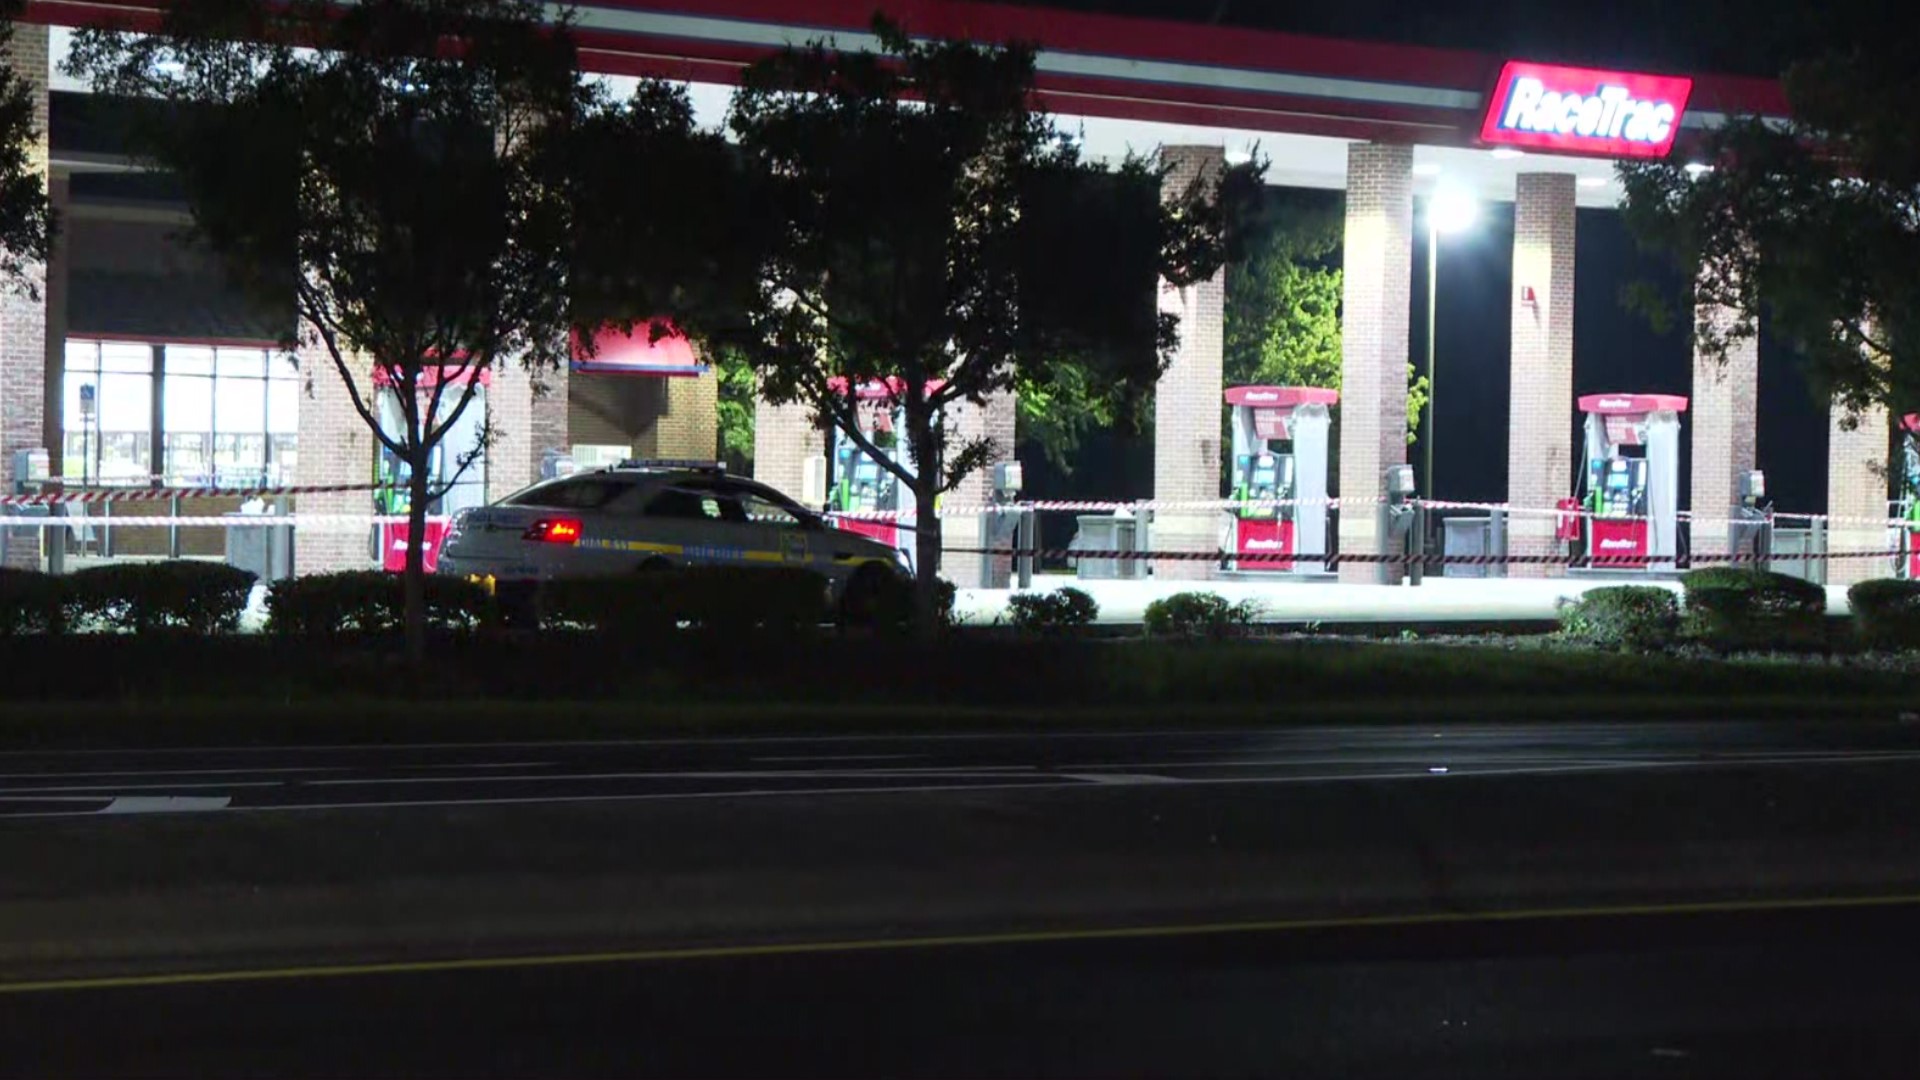 JSO says officers responded to the gas station at approximately 7:55 p.m. on Saturday and found the man suffering from a shotgun wound to his left leg area.